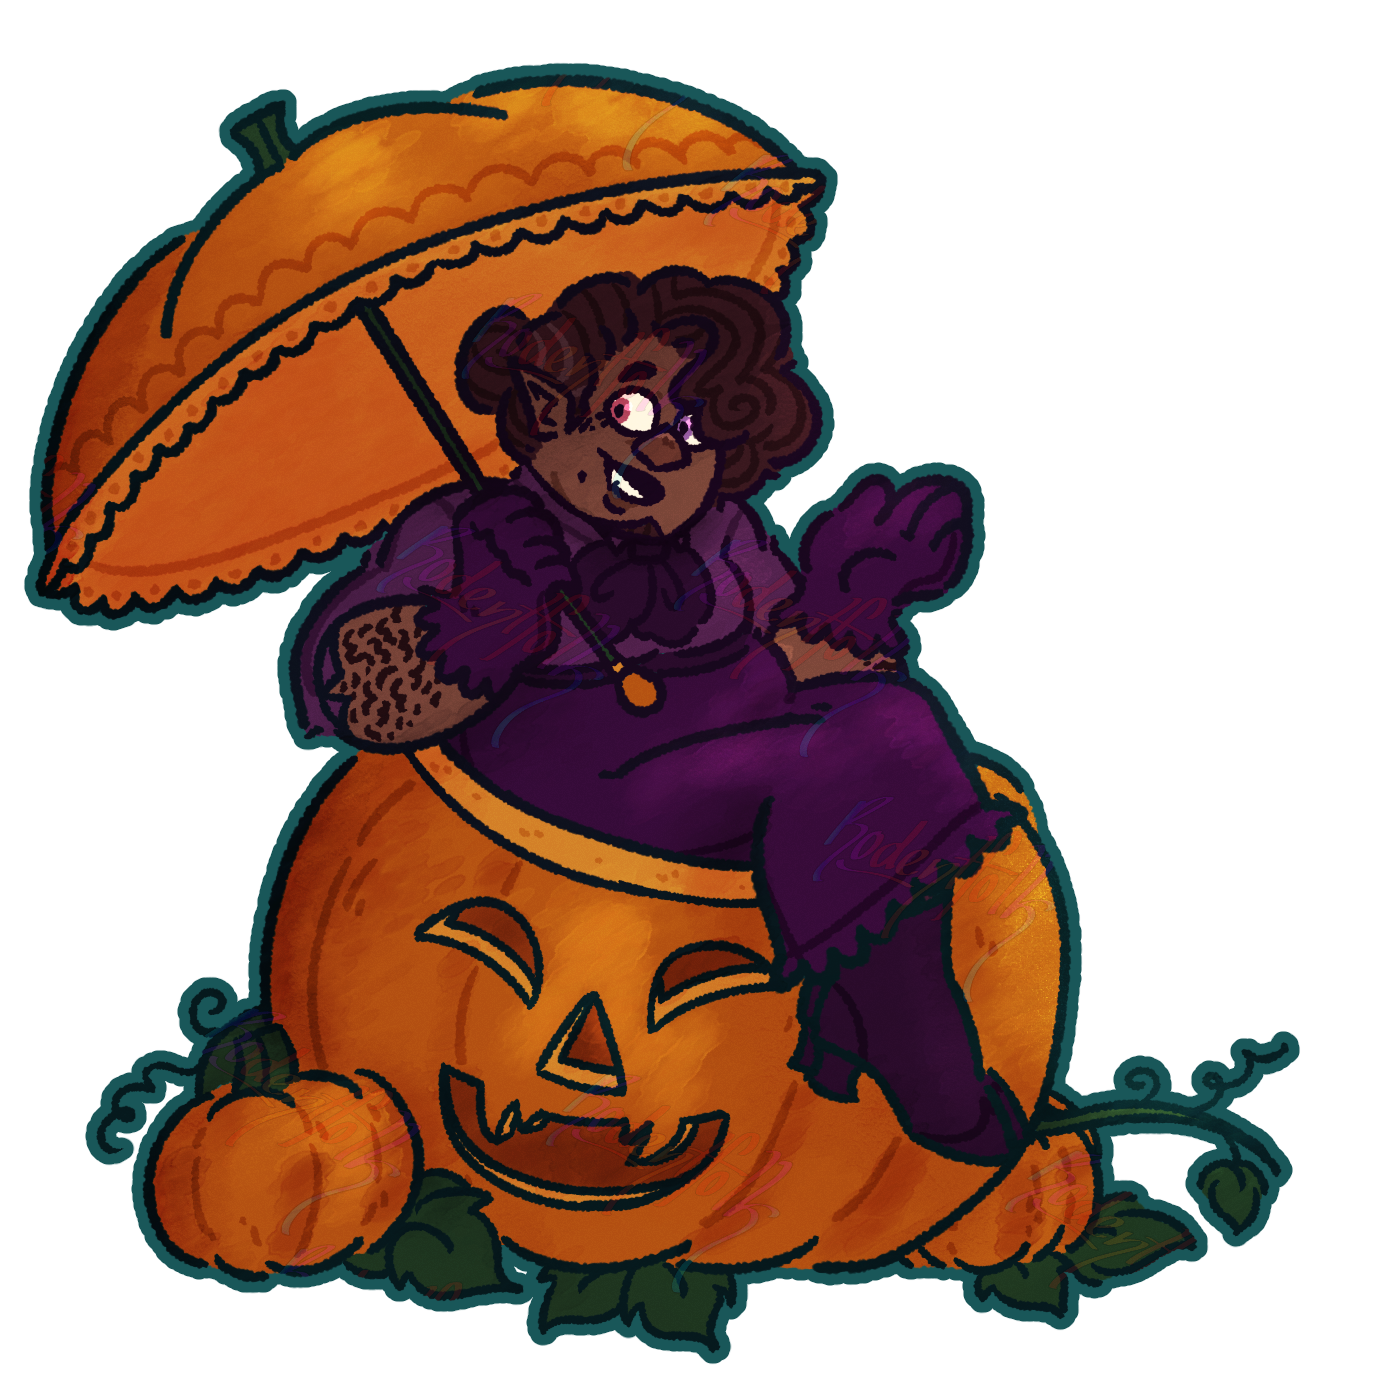 It is an illustration of the artist's character, Rosie. He is sitting in a large carved out pumpkin, while holding a matching parasol in one hand.